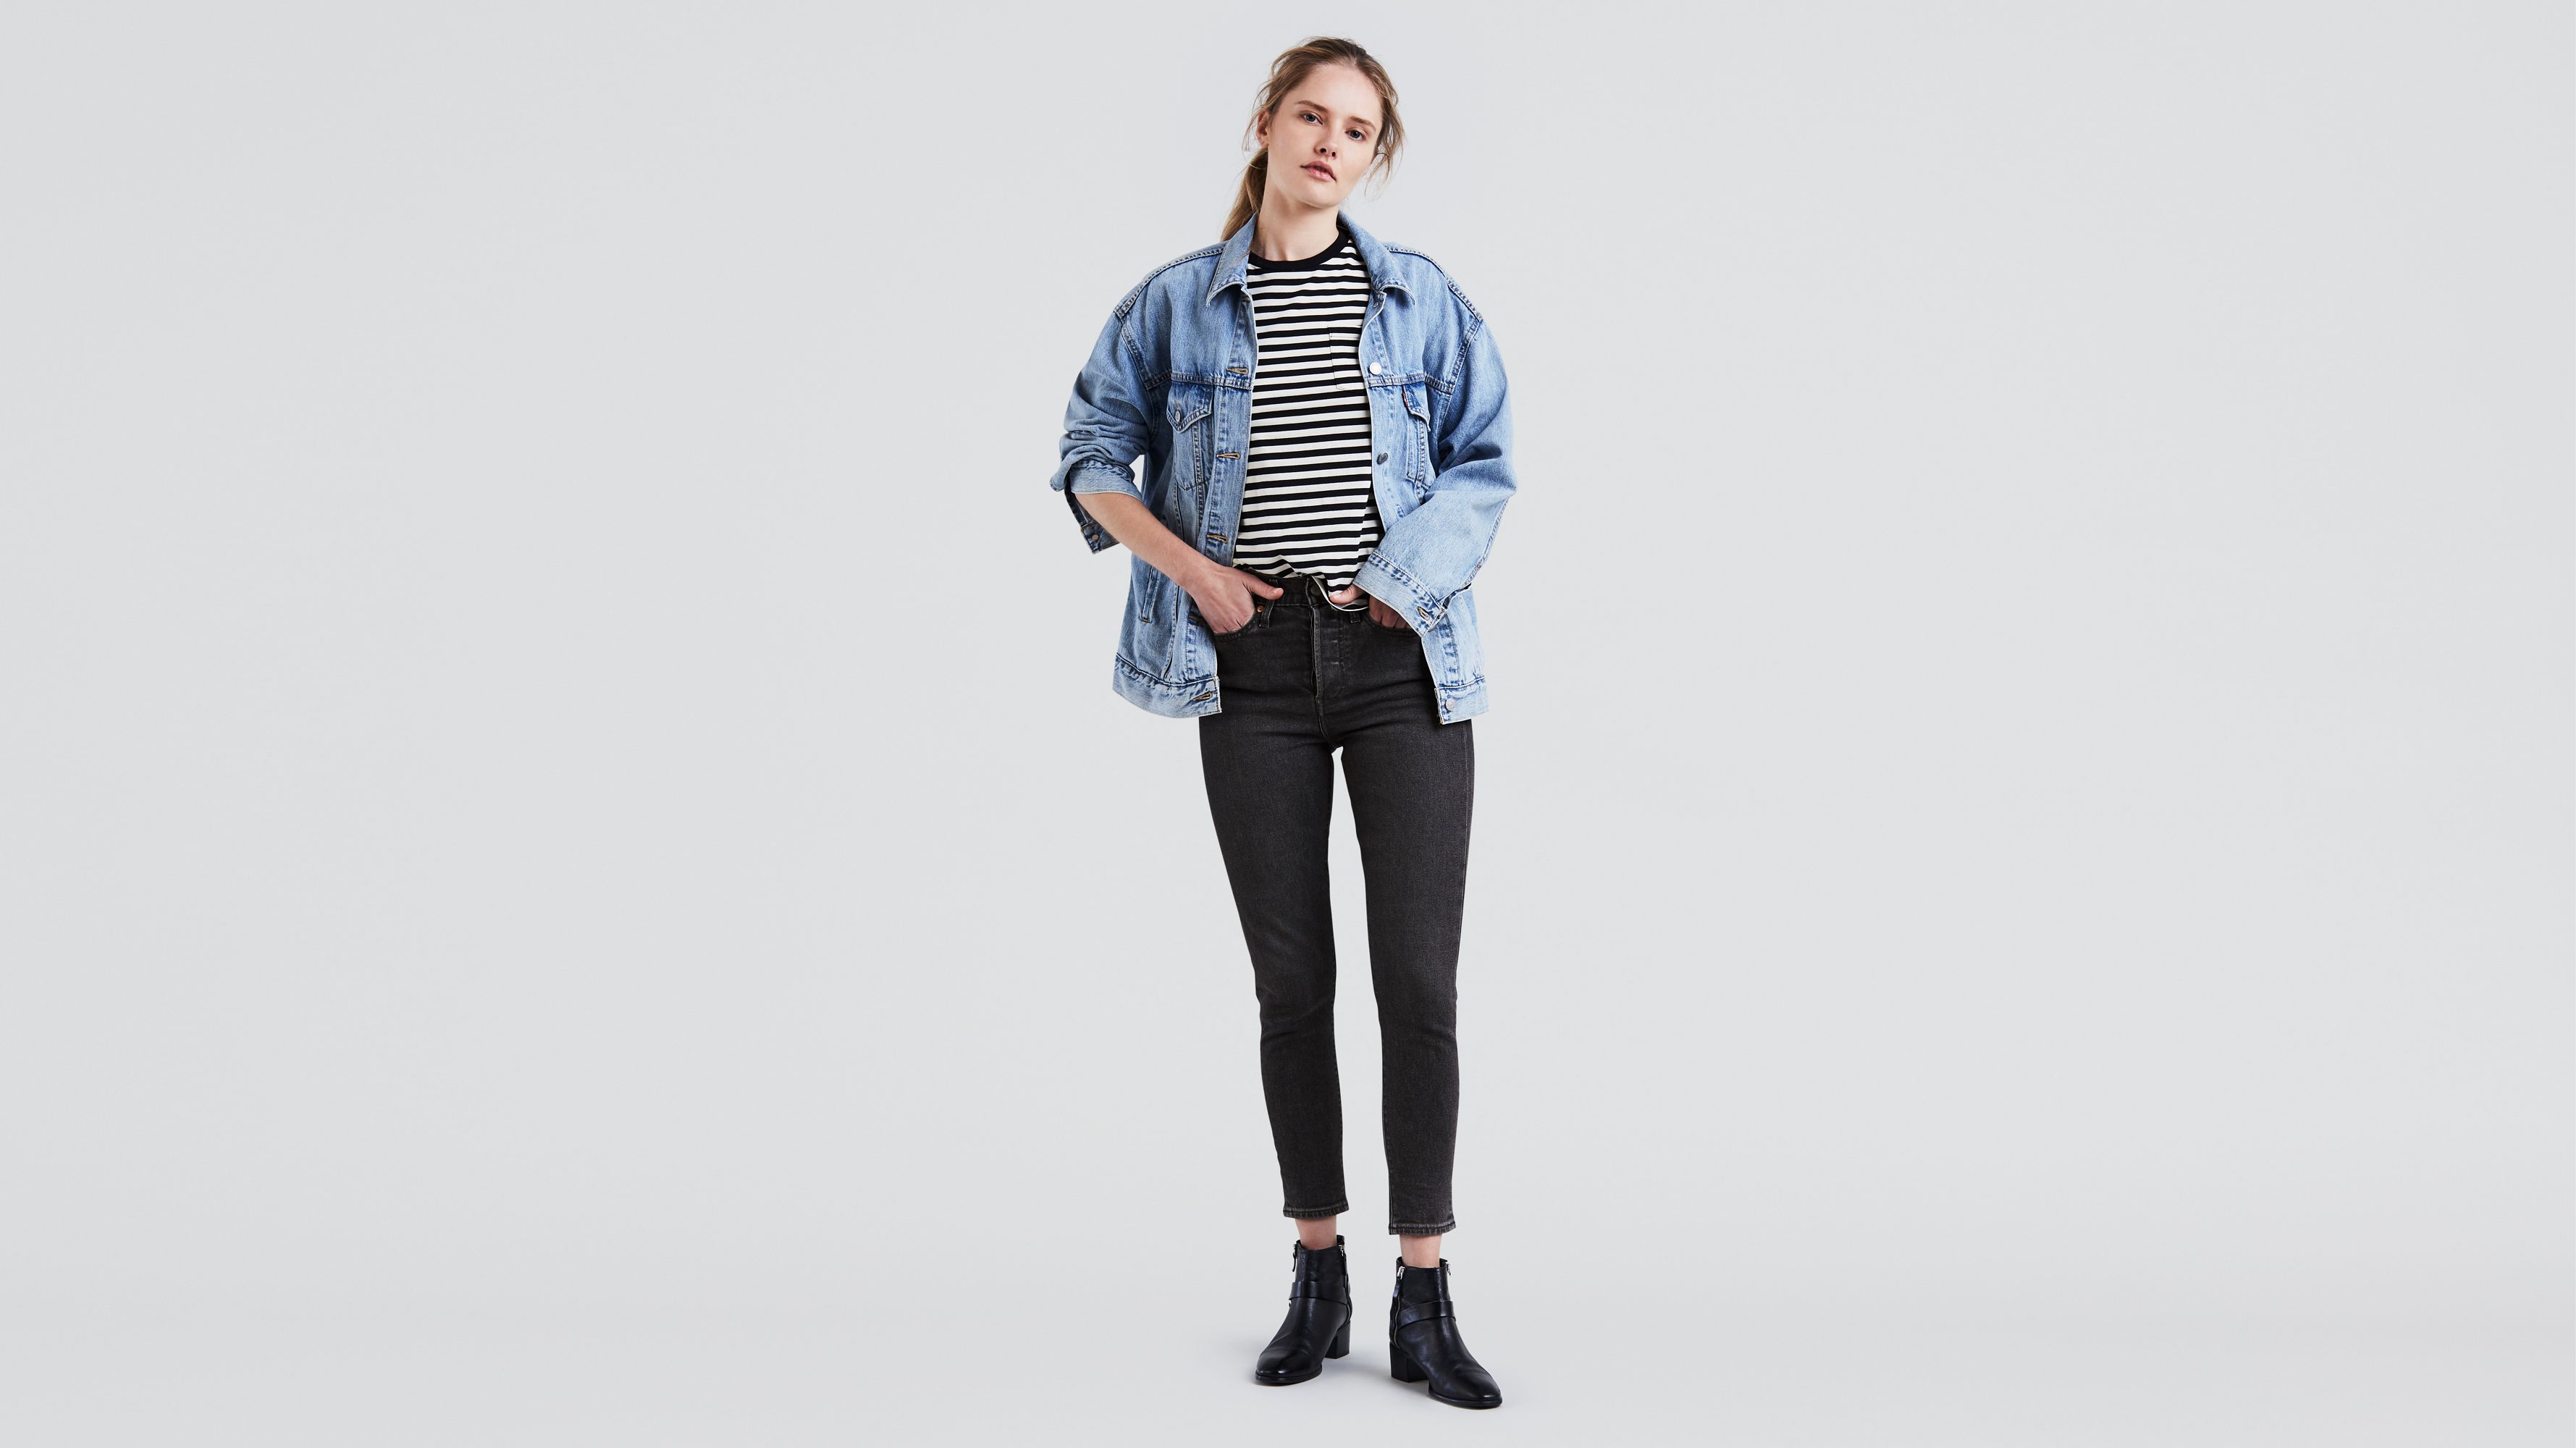 levi's wedgie fit skinny jeans